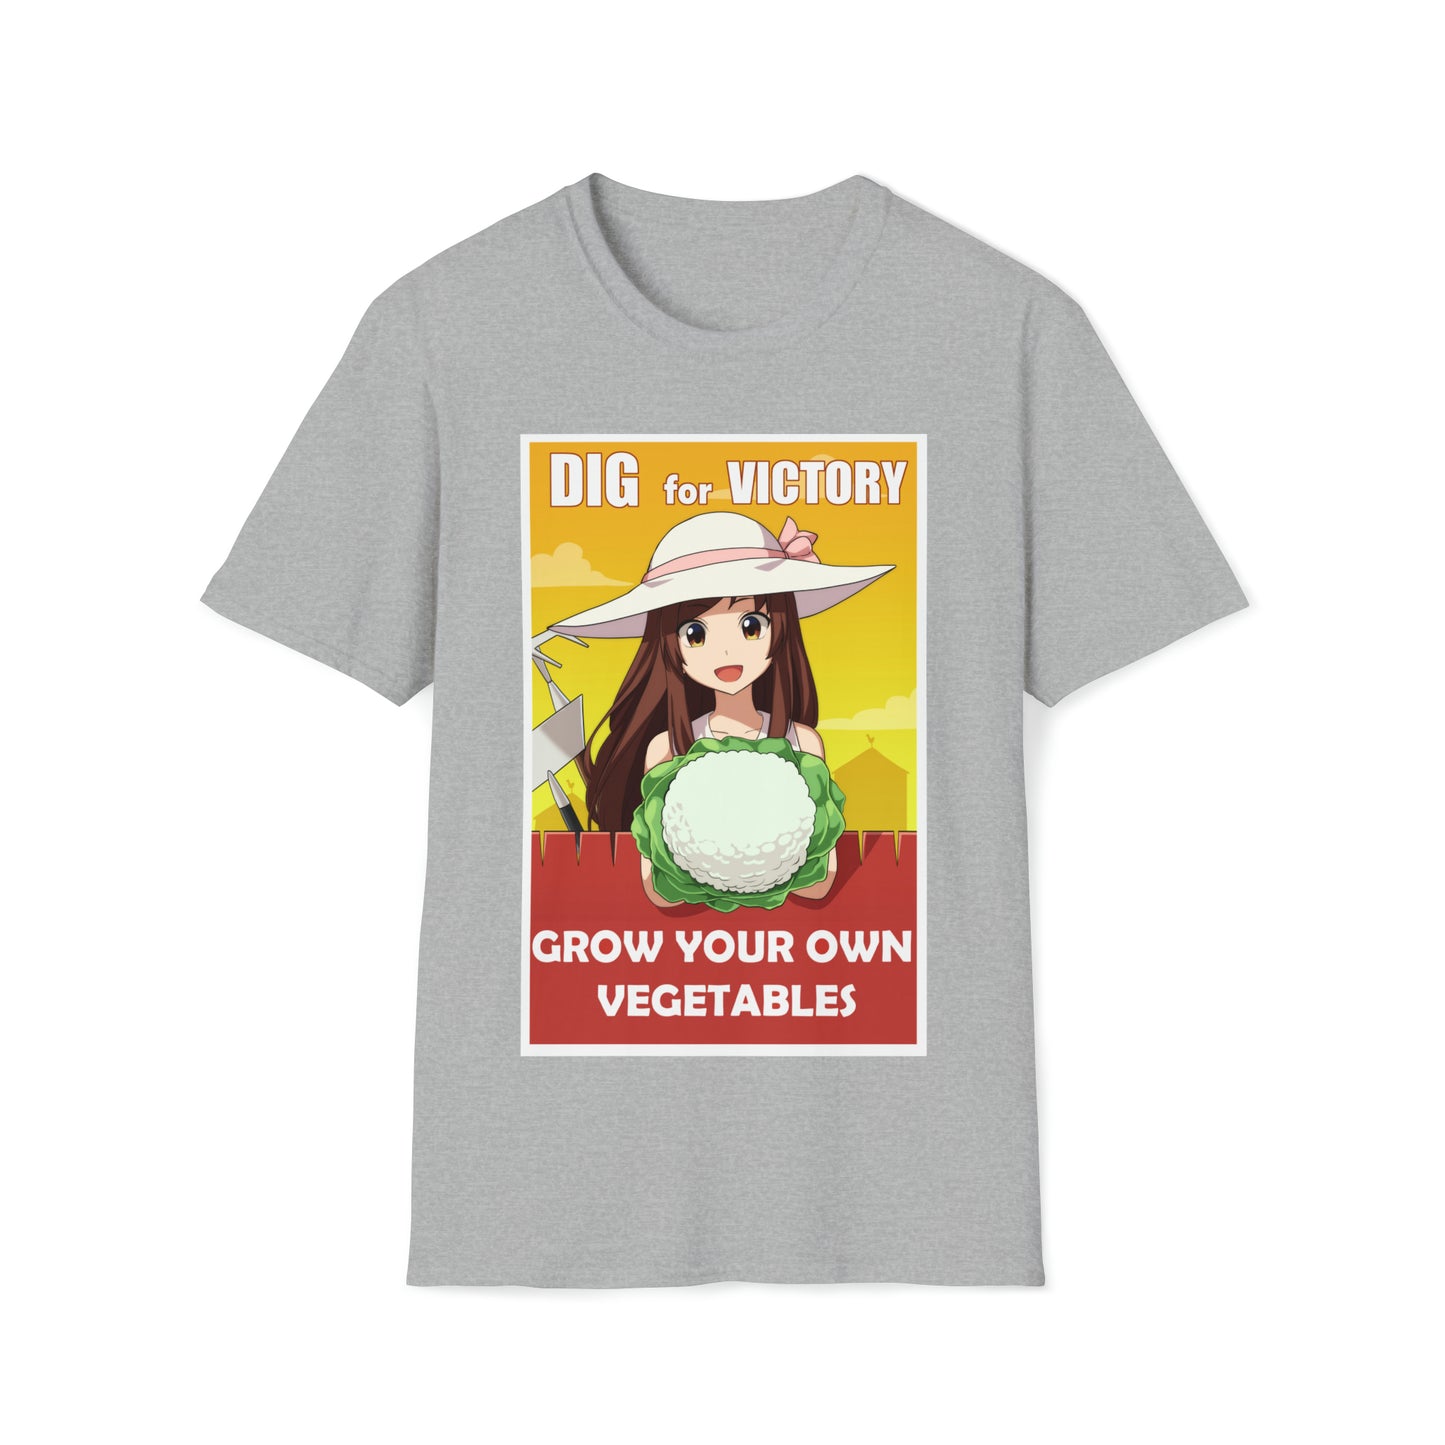 New Dig for Victory! Shirt